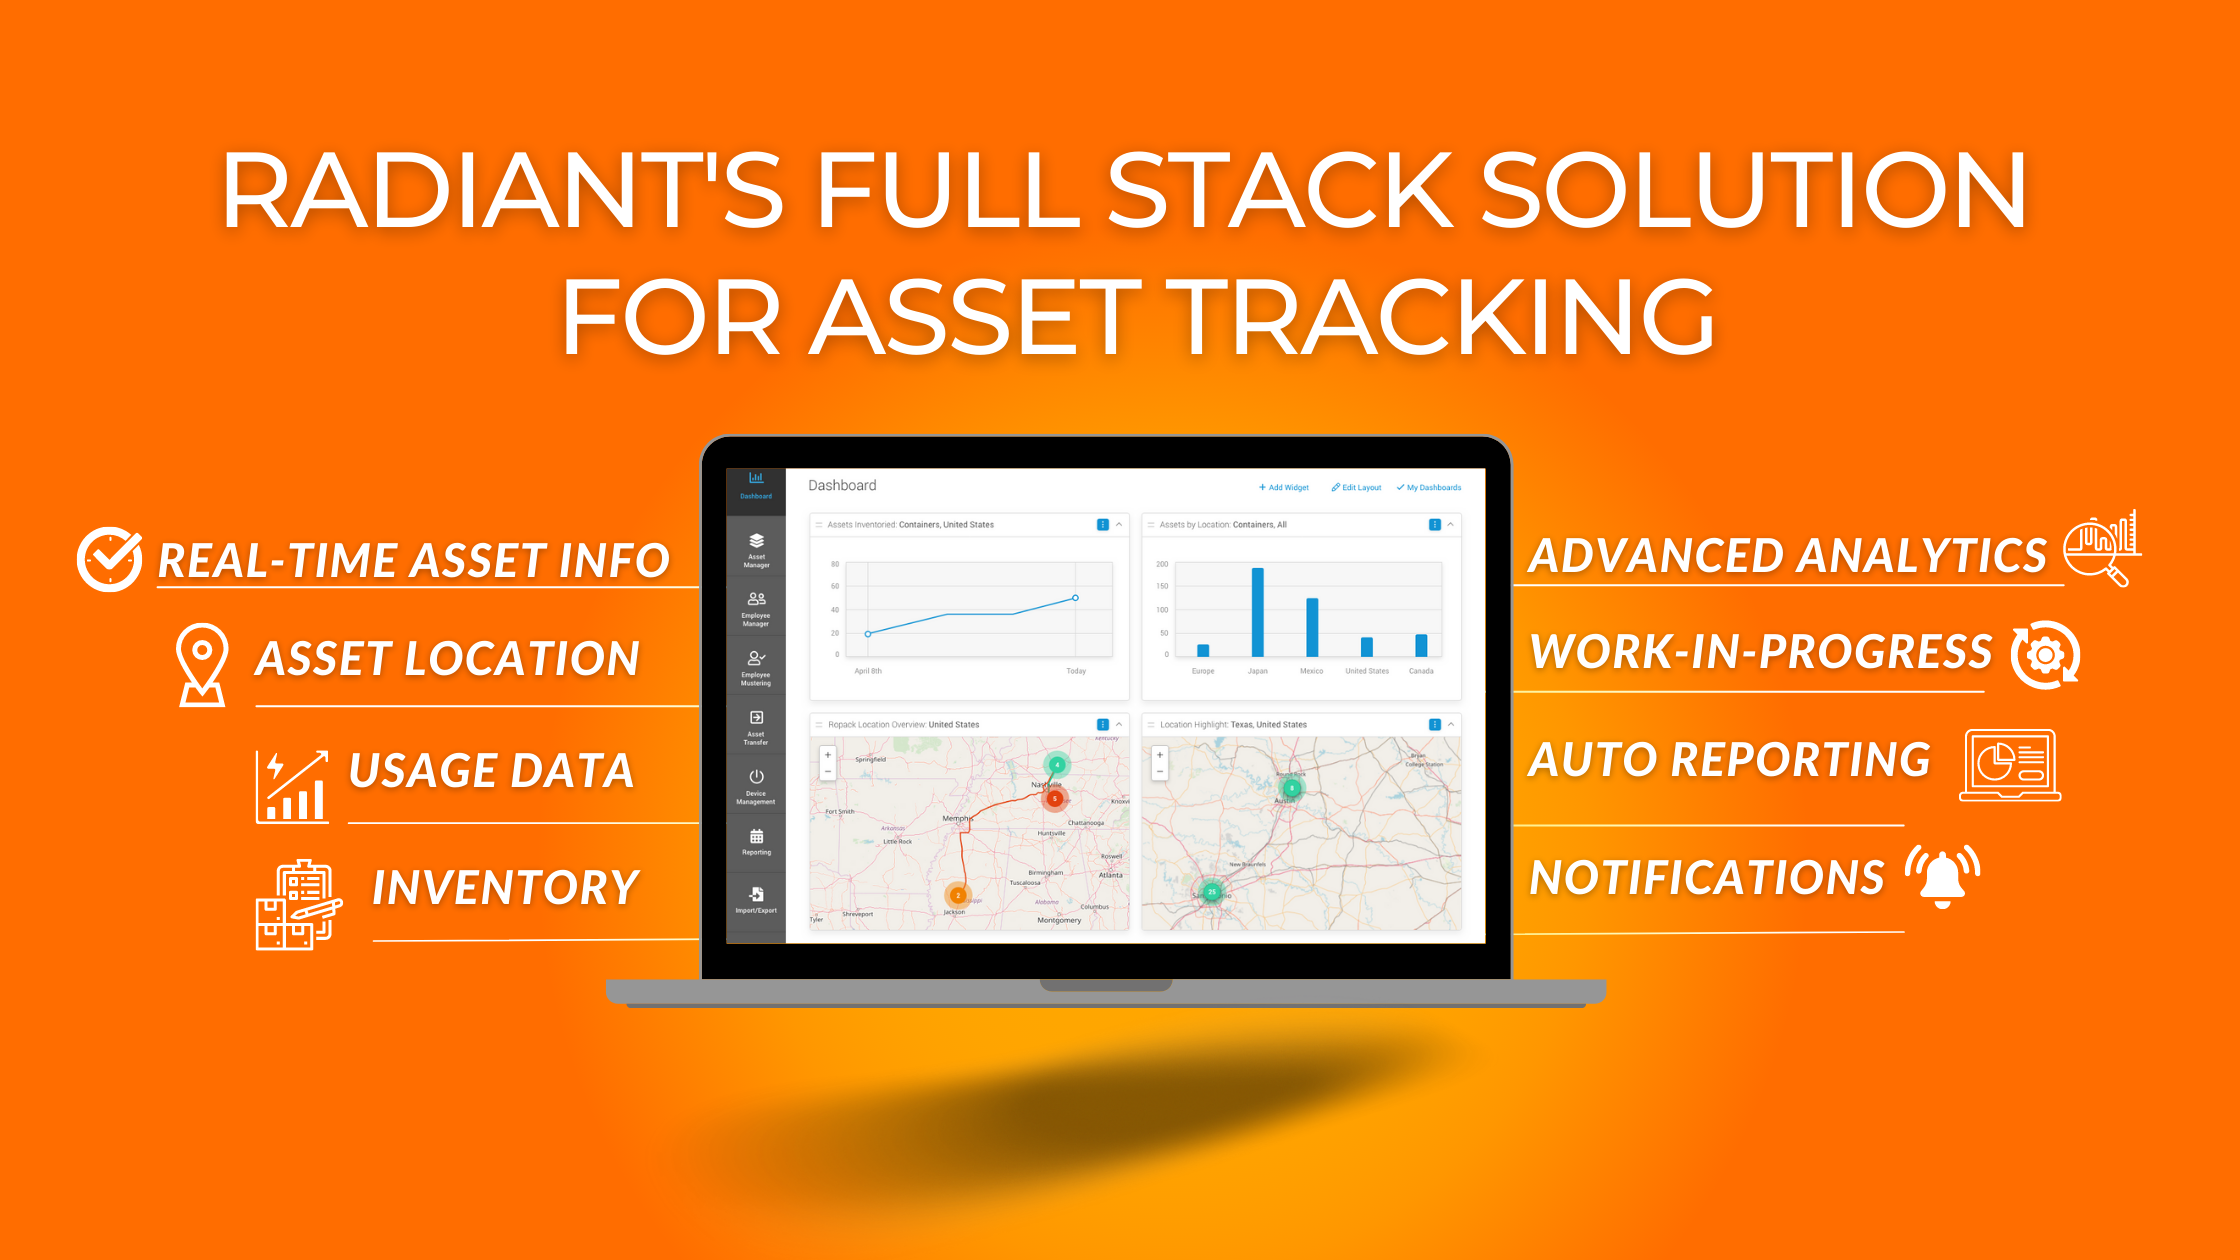 Full Stack Software Solutions - Real Time Asset Tracking - Full Stack Solutions for Real Time Asset Tracking - Full Stack Platform - Full Stack Solution - Real Time Asset Tracking Solution - Full Stack IoT - Full Stack Technology Platform for Real Time Asset Tracking - Full Stack Solutions